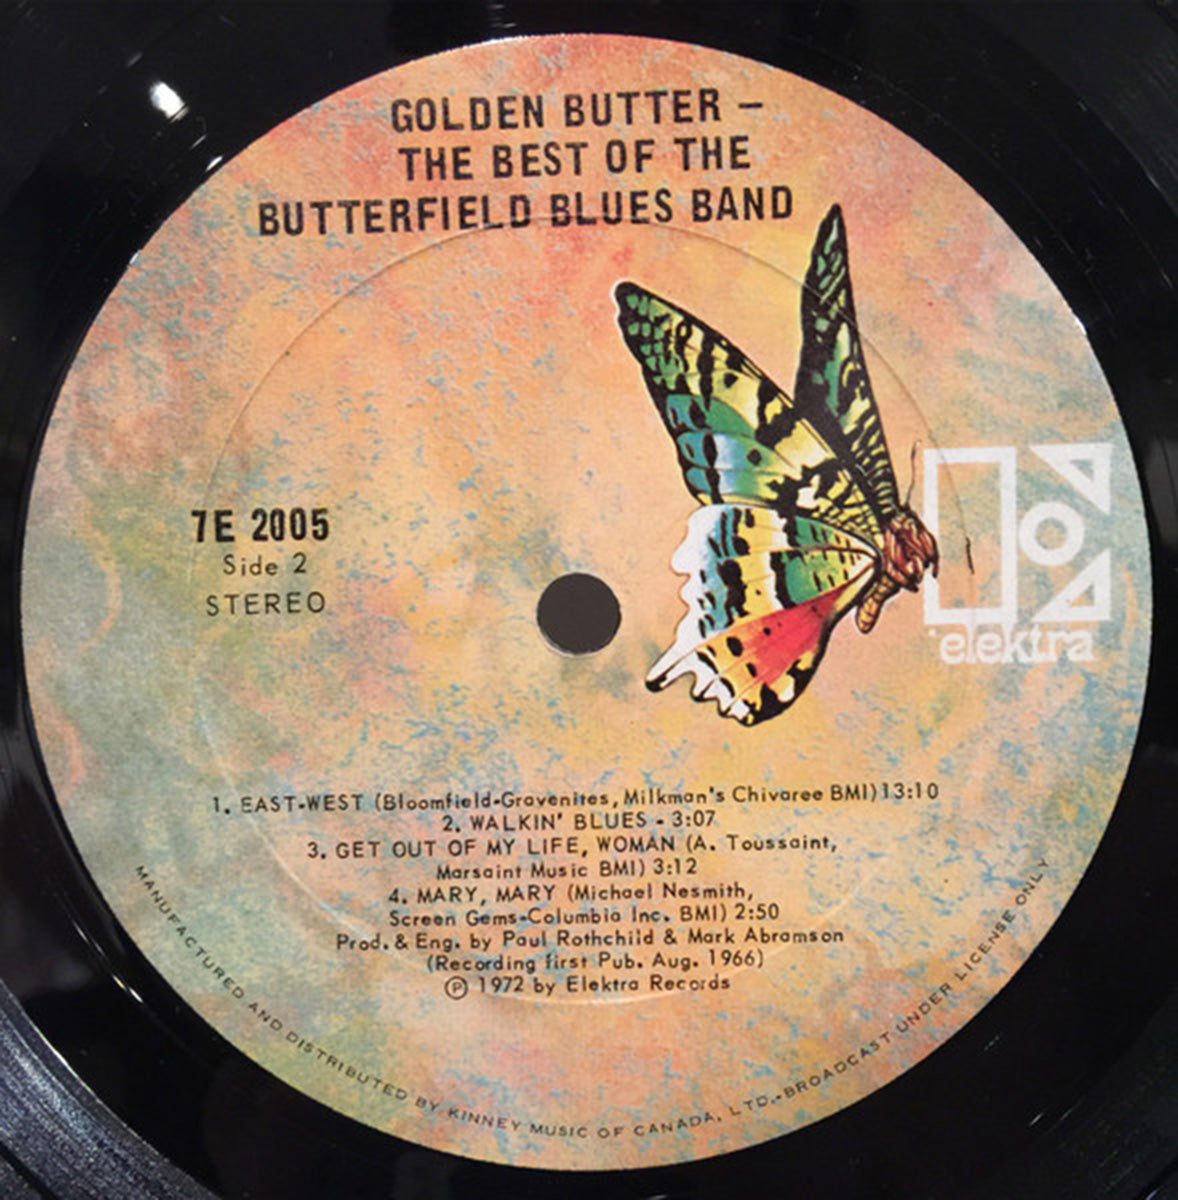 The Paul Butterfield Blues Band – Golden Butter, The Best Of -  1972 Rare in Shrinkwrap!